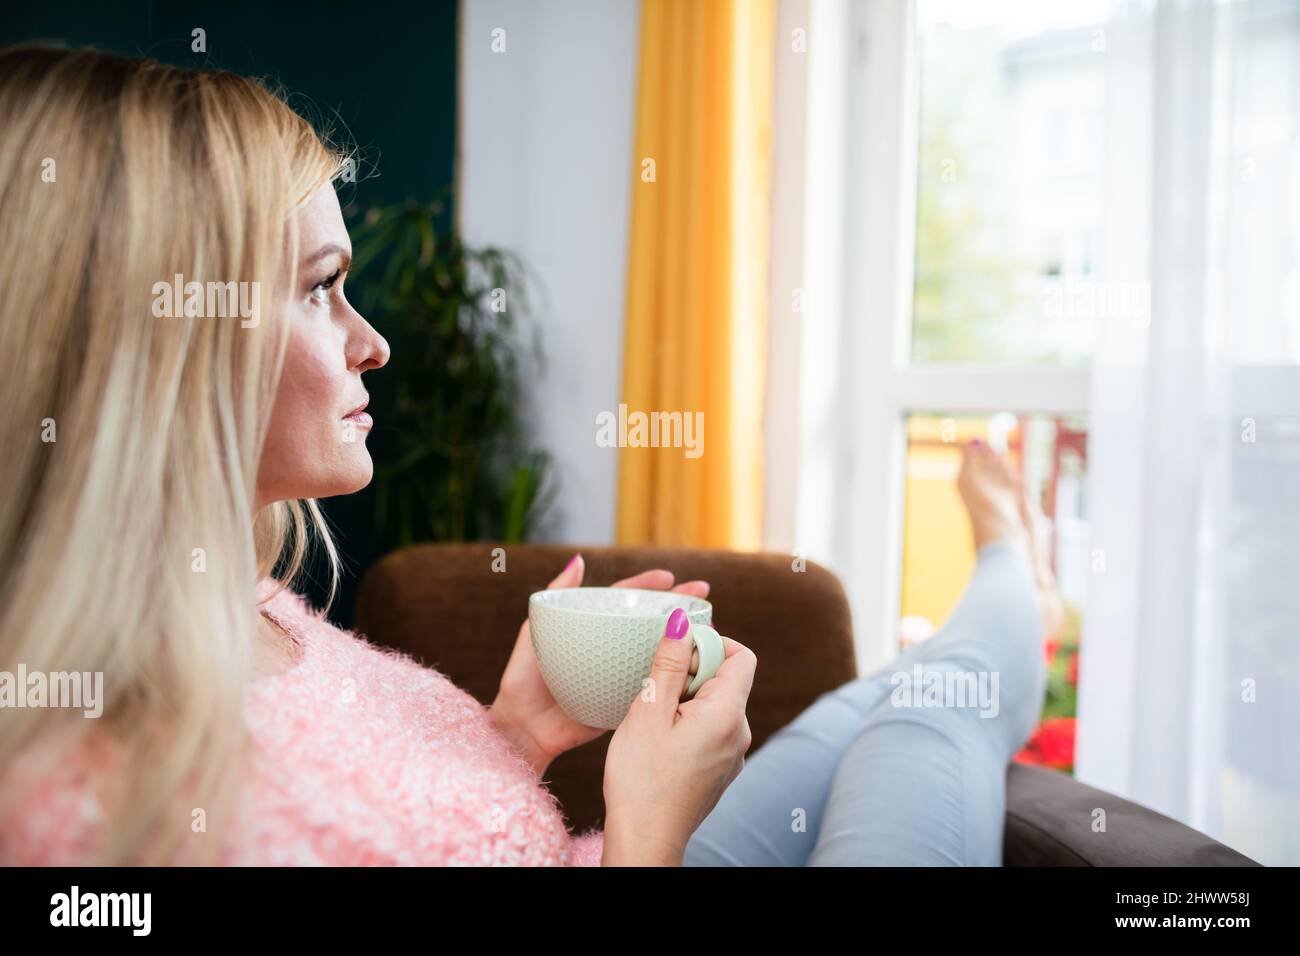 A young woman holds a cup and looks ahead. Stock Photo